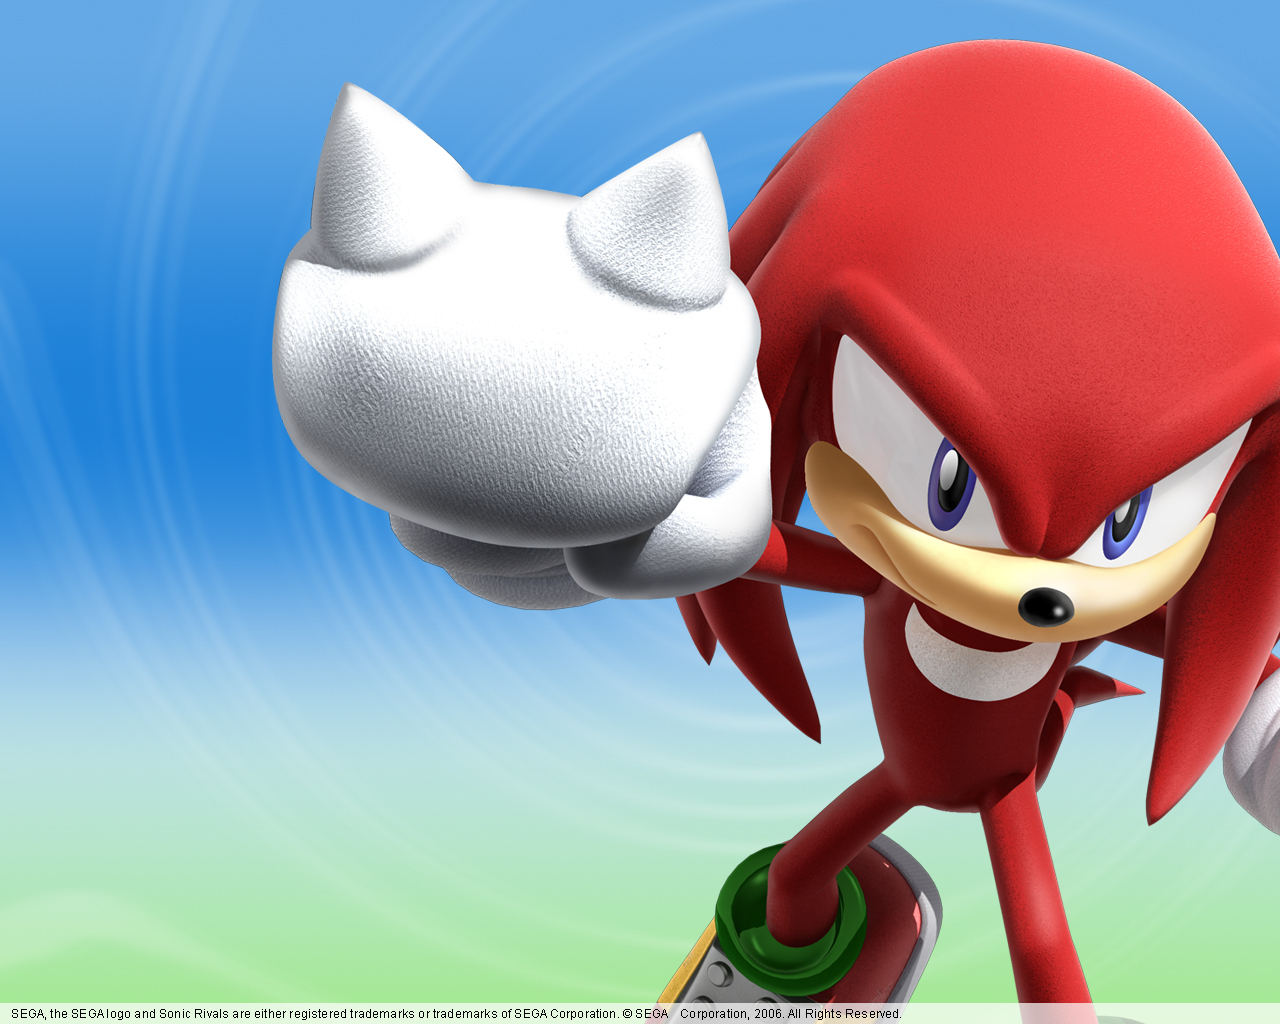 Sonic Rivals Knuckles - Knuckles the Echidna Wallpaper (1870564 ...